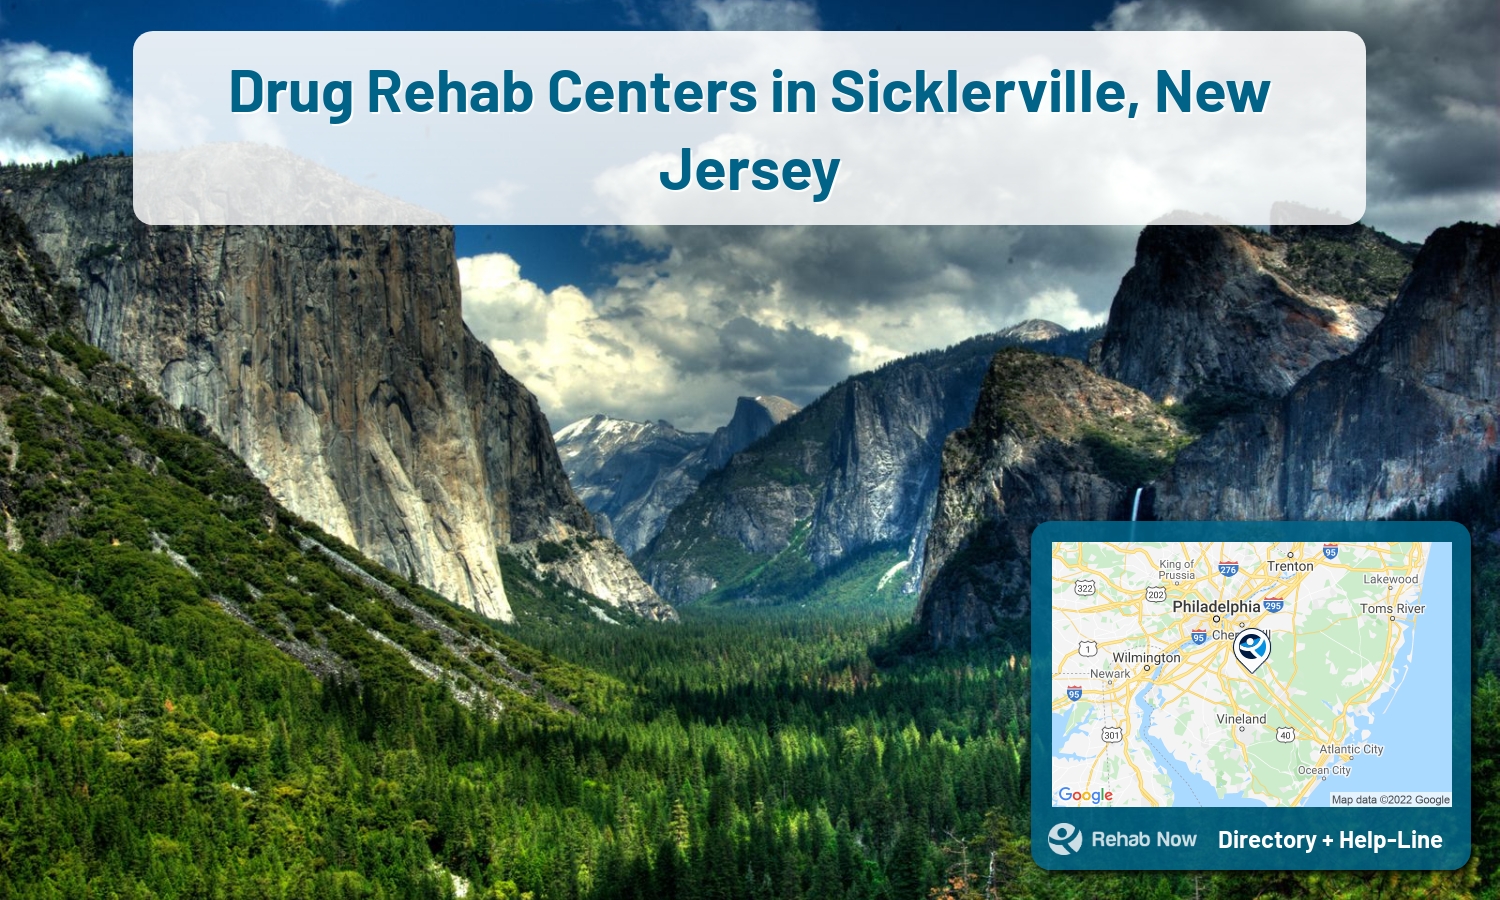 Sicklerville, NJ Treatment Centers. Find drug rehab in Sicklerville, New Jersey, or detox and treatment programs. Get the right help now!